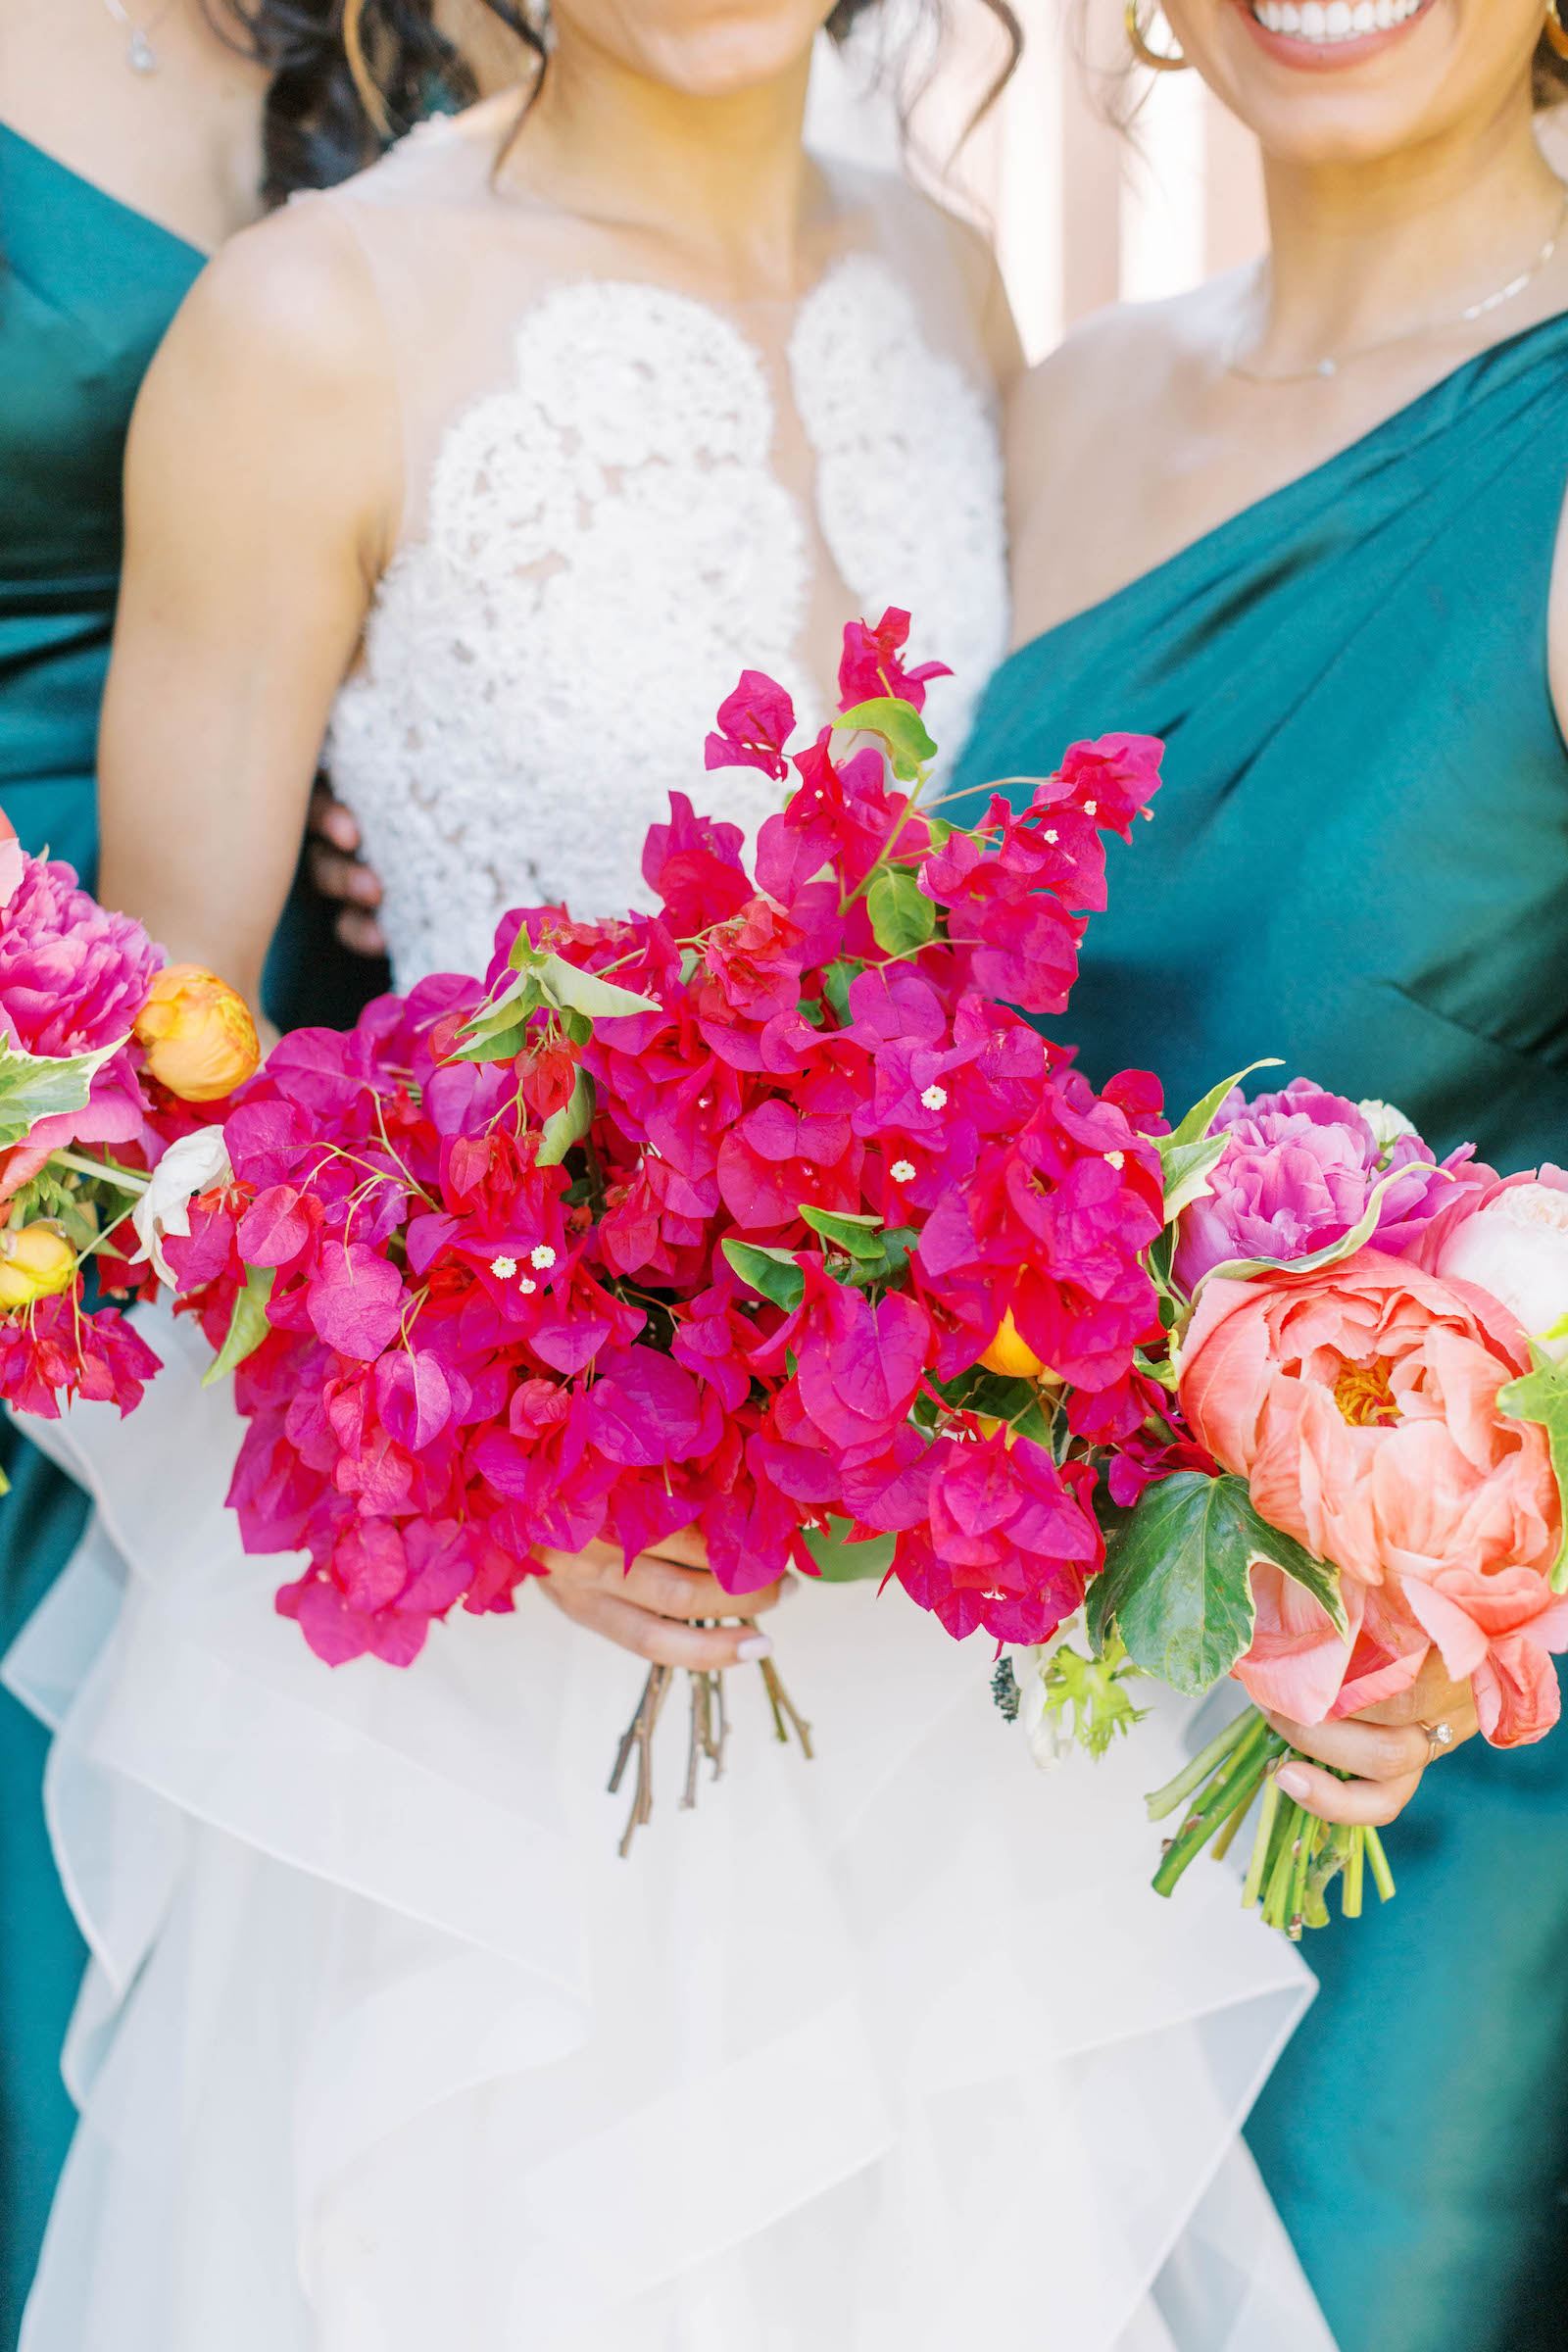 Bride and Bridesmaids Hot Pink and Orange Floral Wedding Bouquet